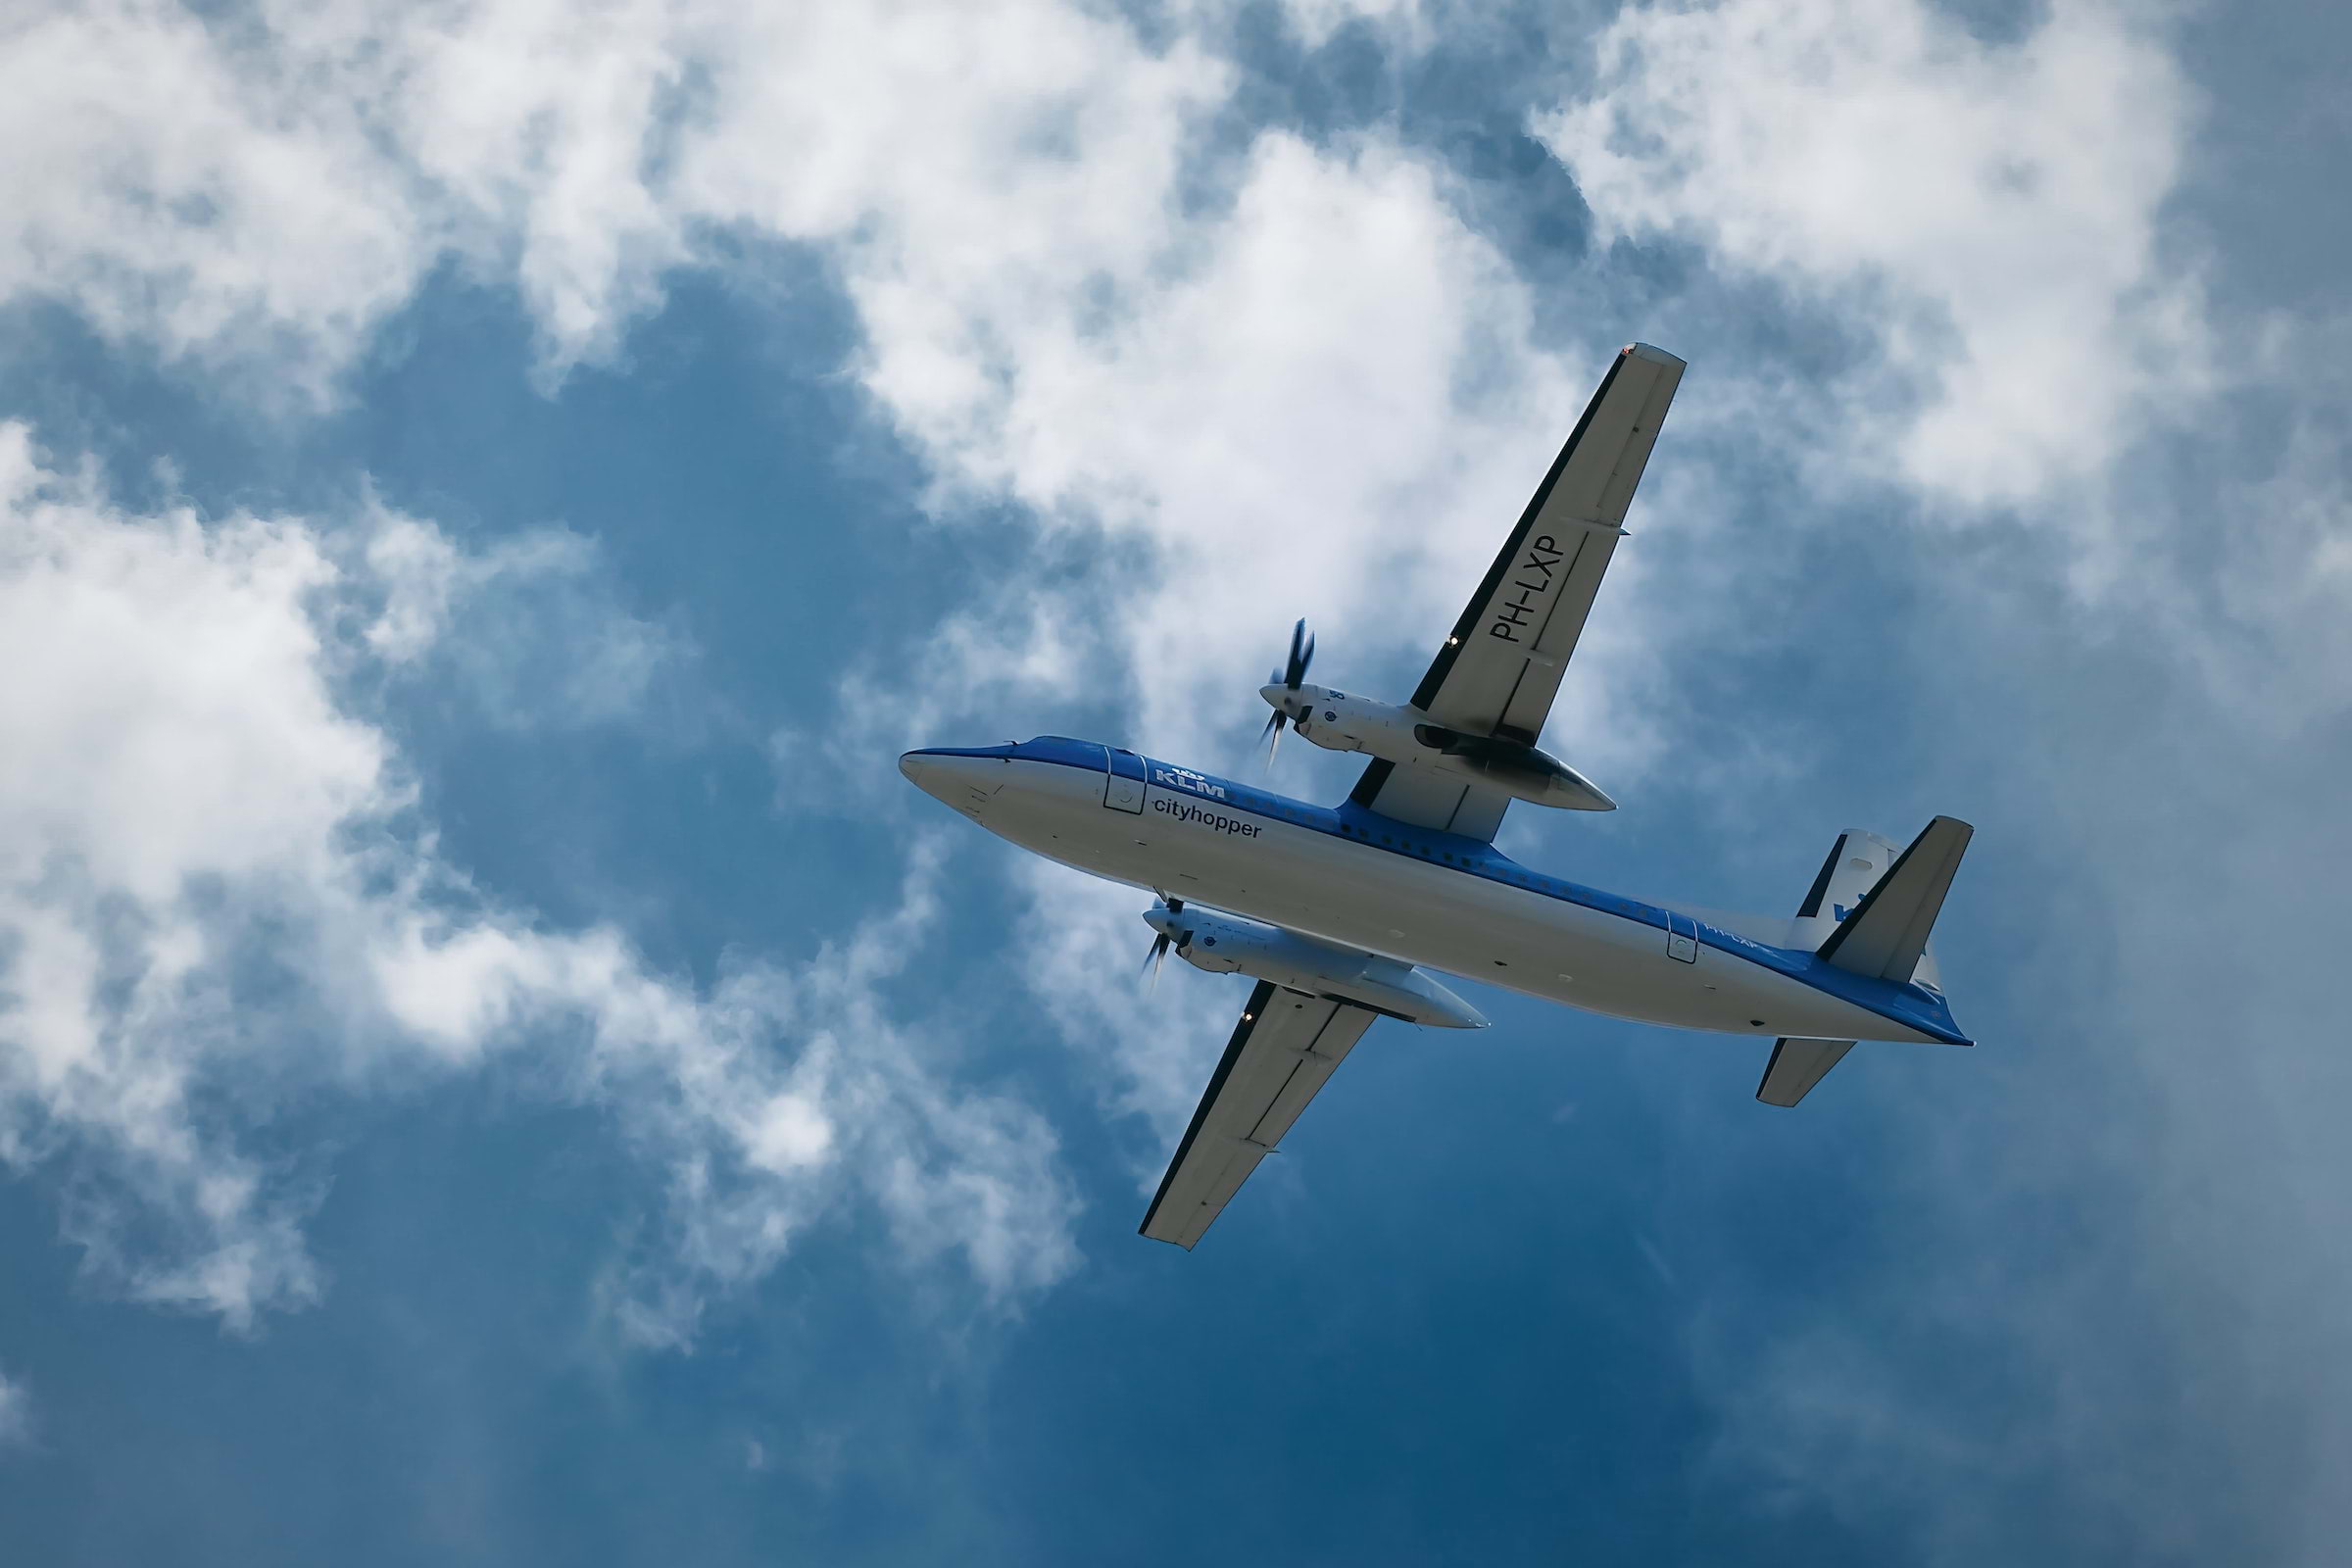 An aeroplane flying with a blue sky in the background